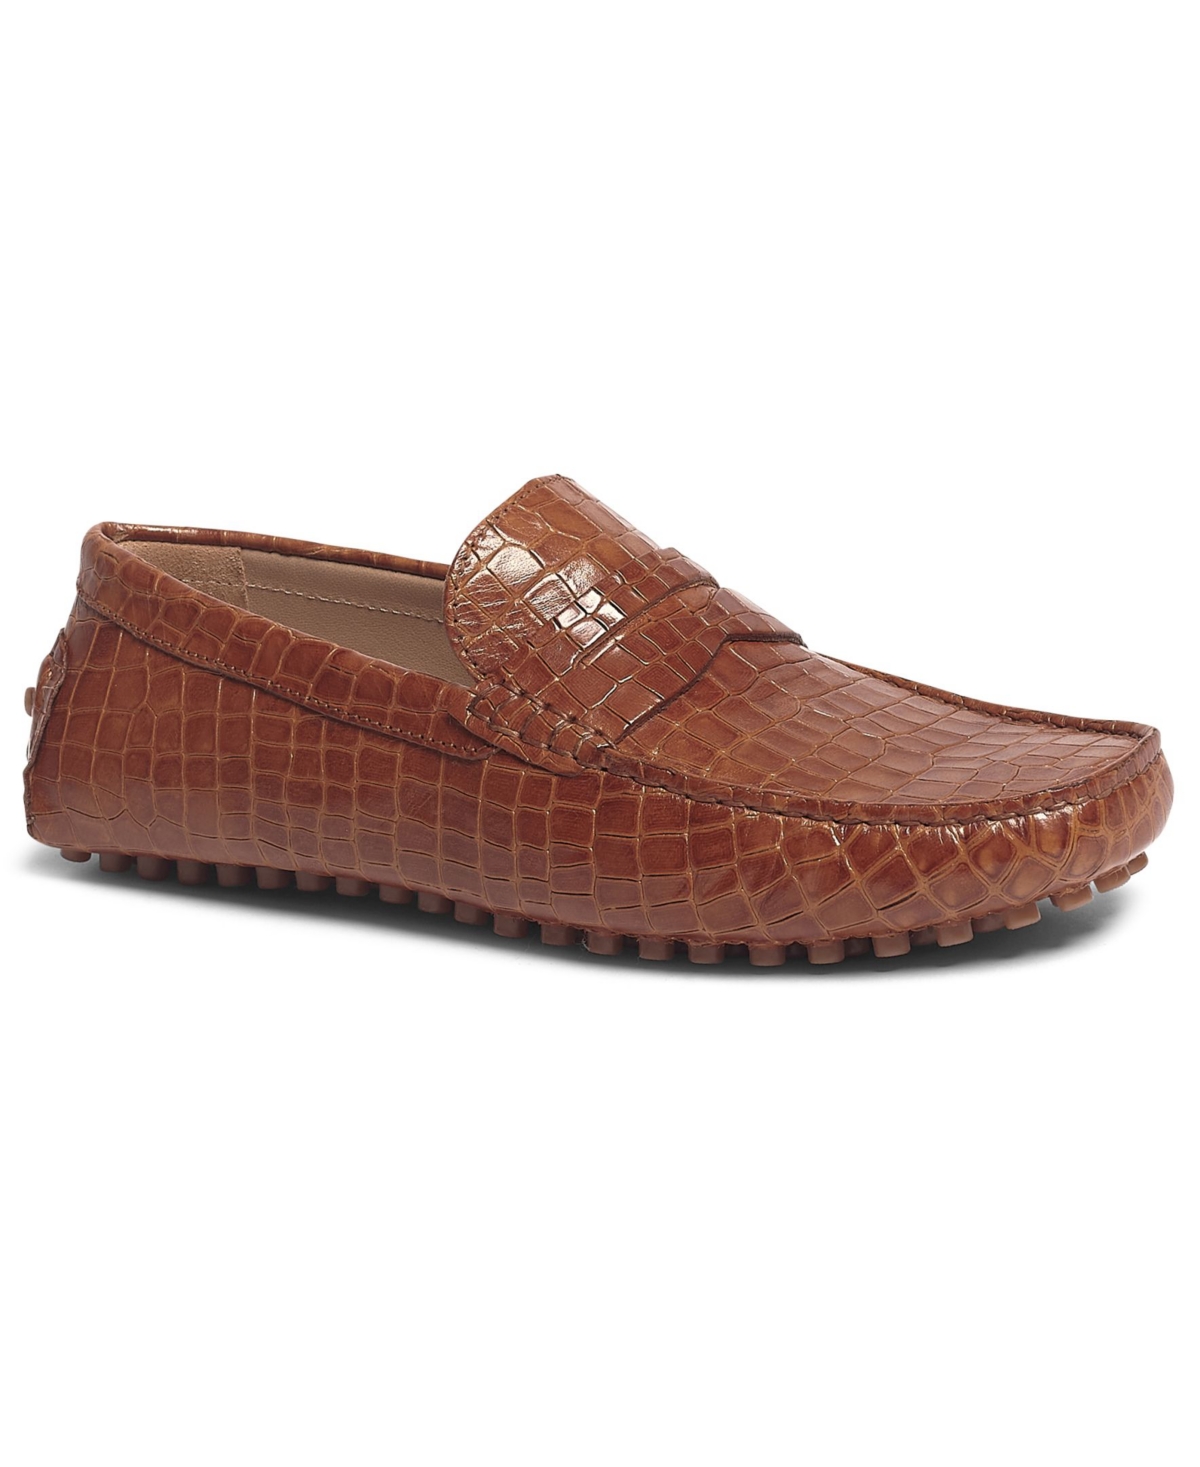 Men's Ritchie Penny Loafer Shoes - Tan